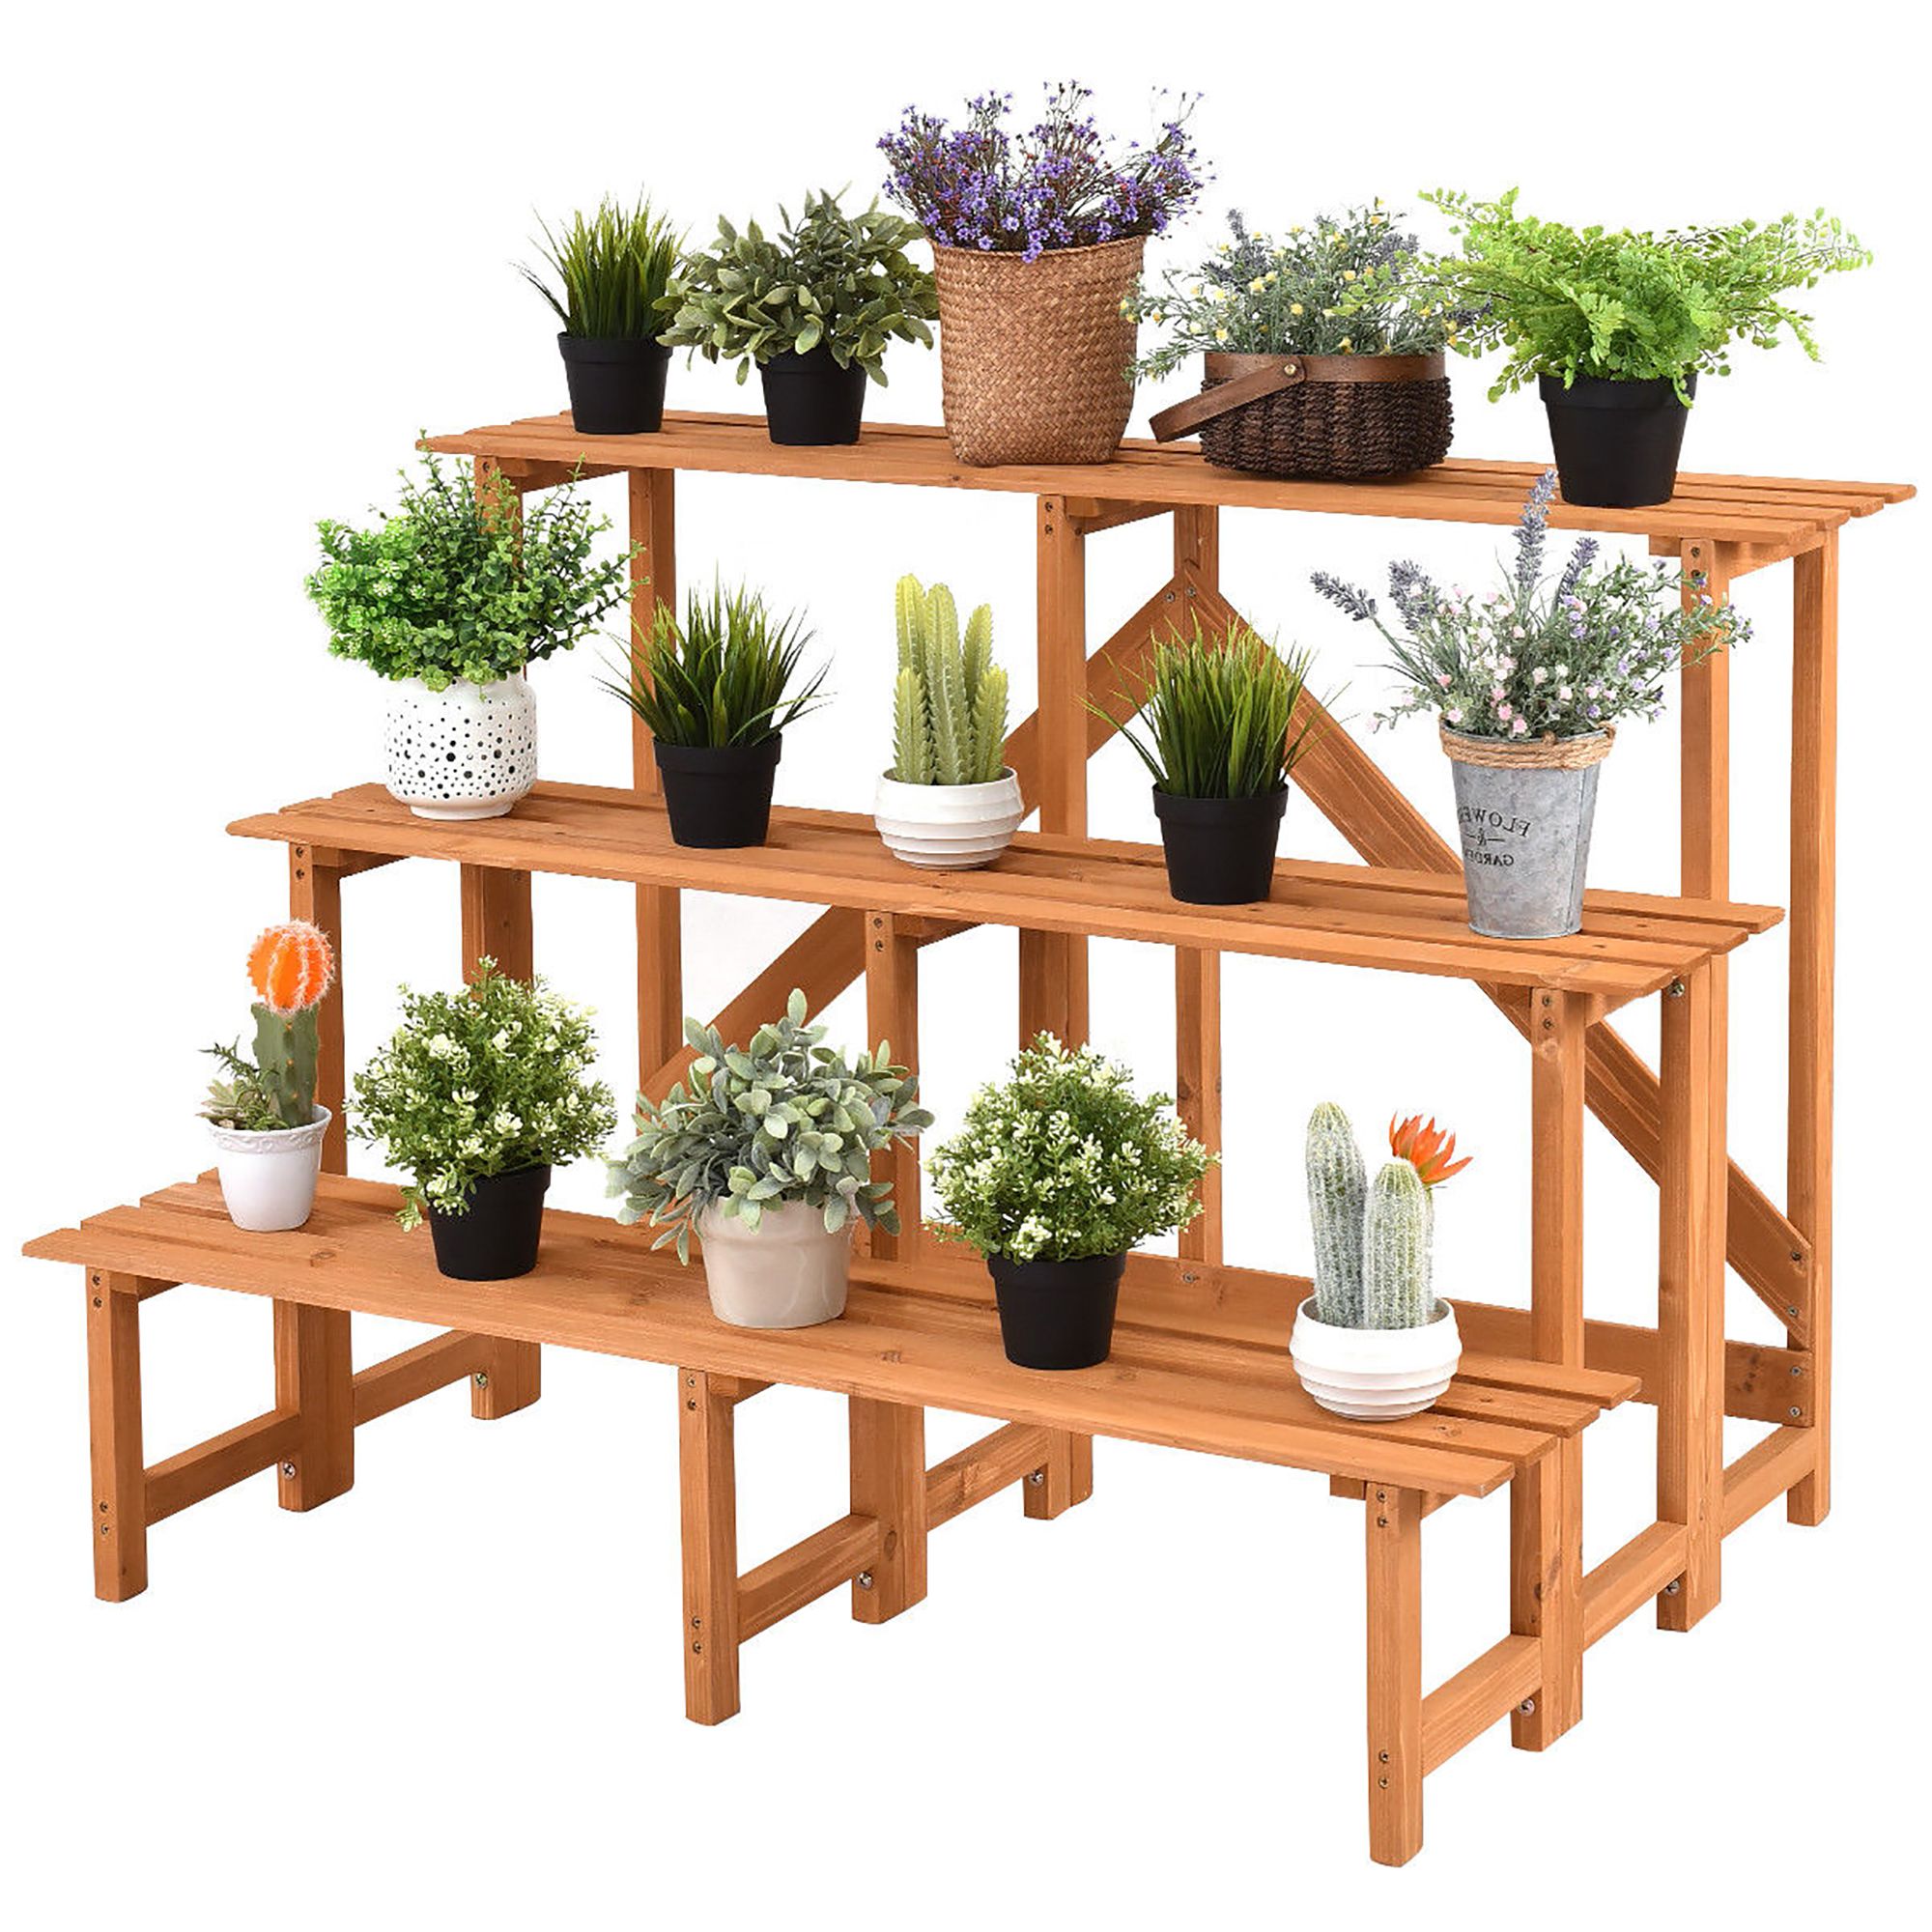 Costway 3 Tier Wide Wood Plant Stand Flower Pot Holder Display Rack Shelves  Step Ladder – Walmart For Wide Plant Stands (View 13 of 15)